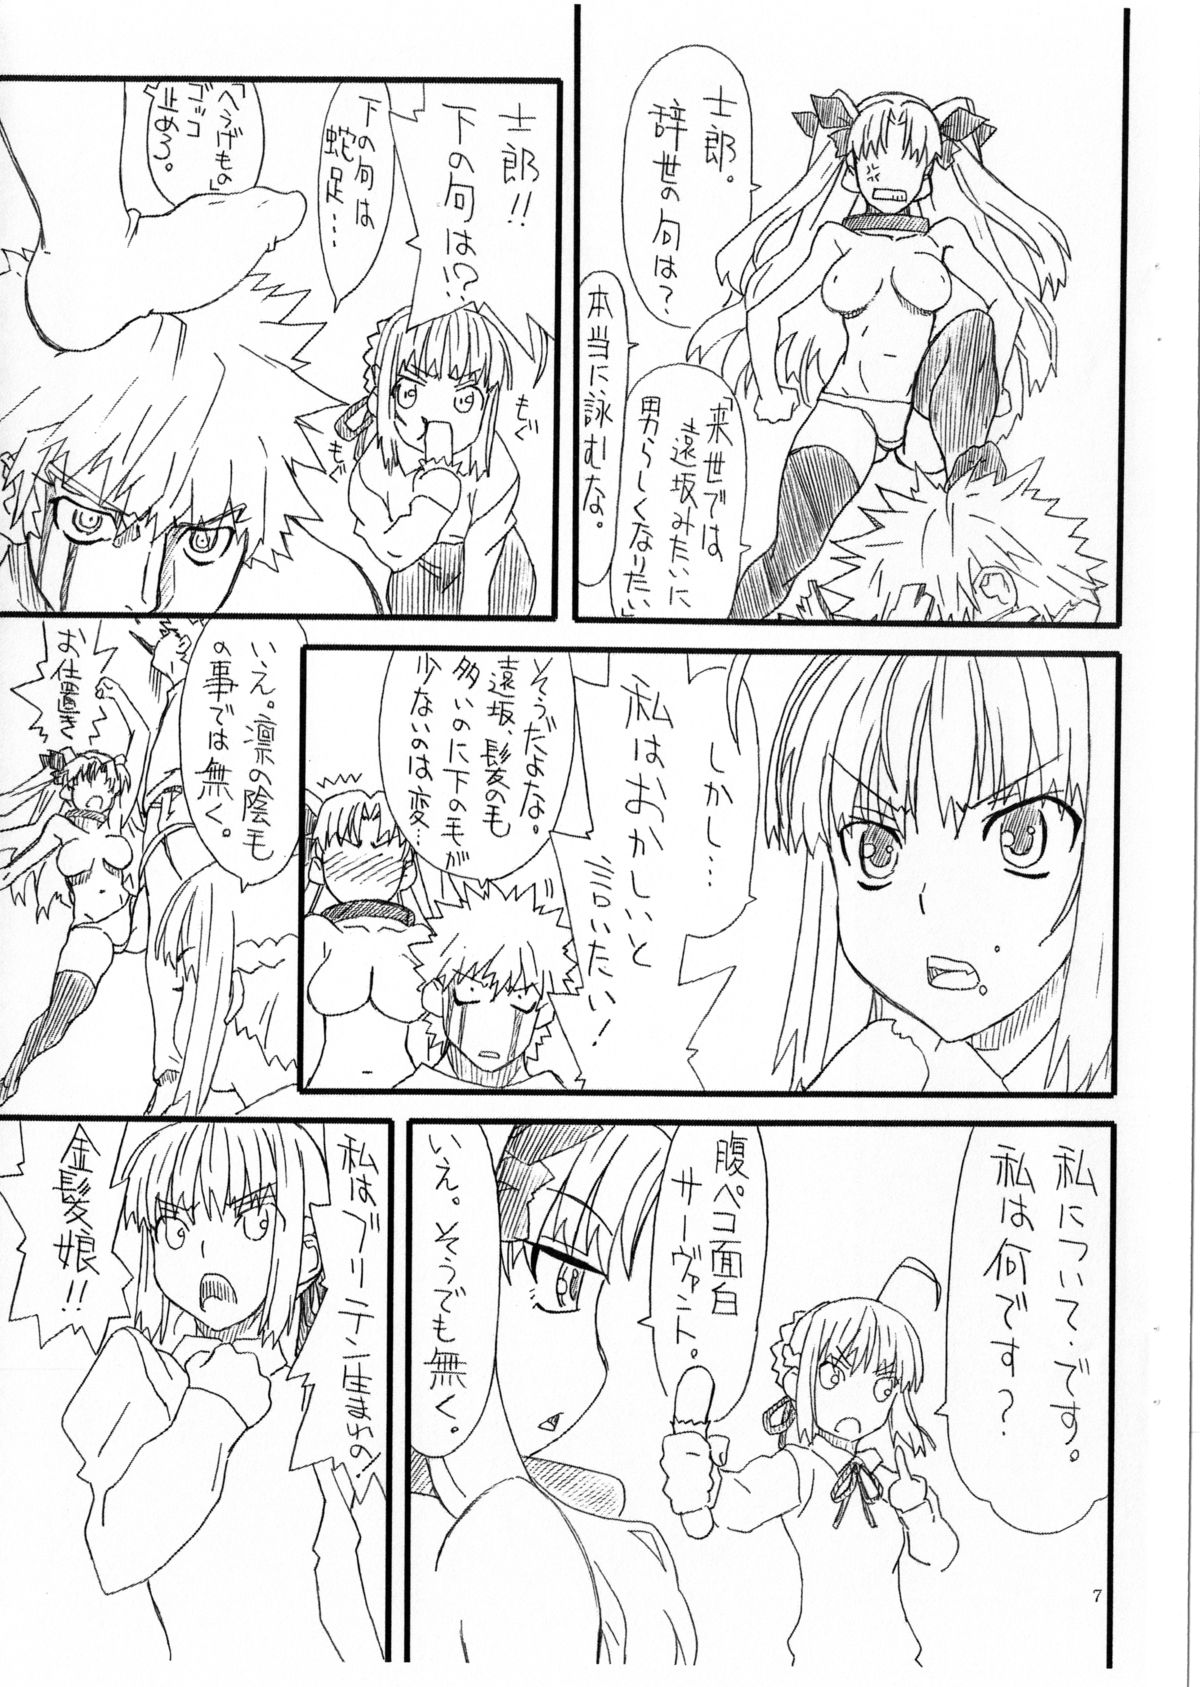 (SC65) [Power Slide (Uttorikun)] Rin to saber 1st Ver0.5 (Fate/stay night) page 8 full